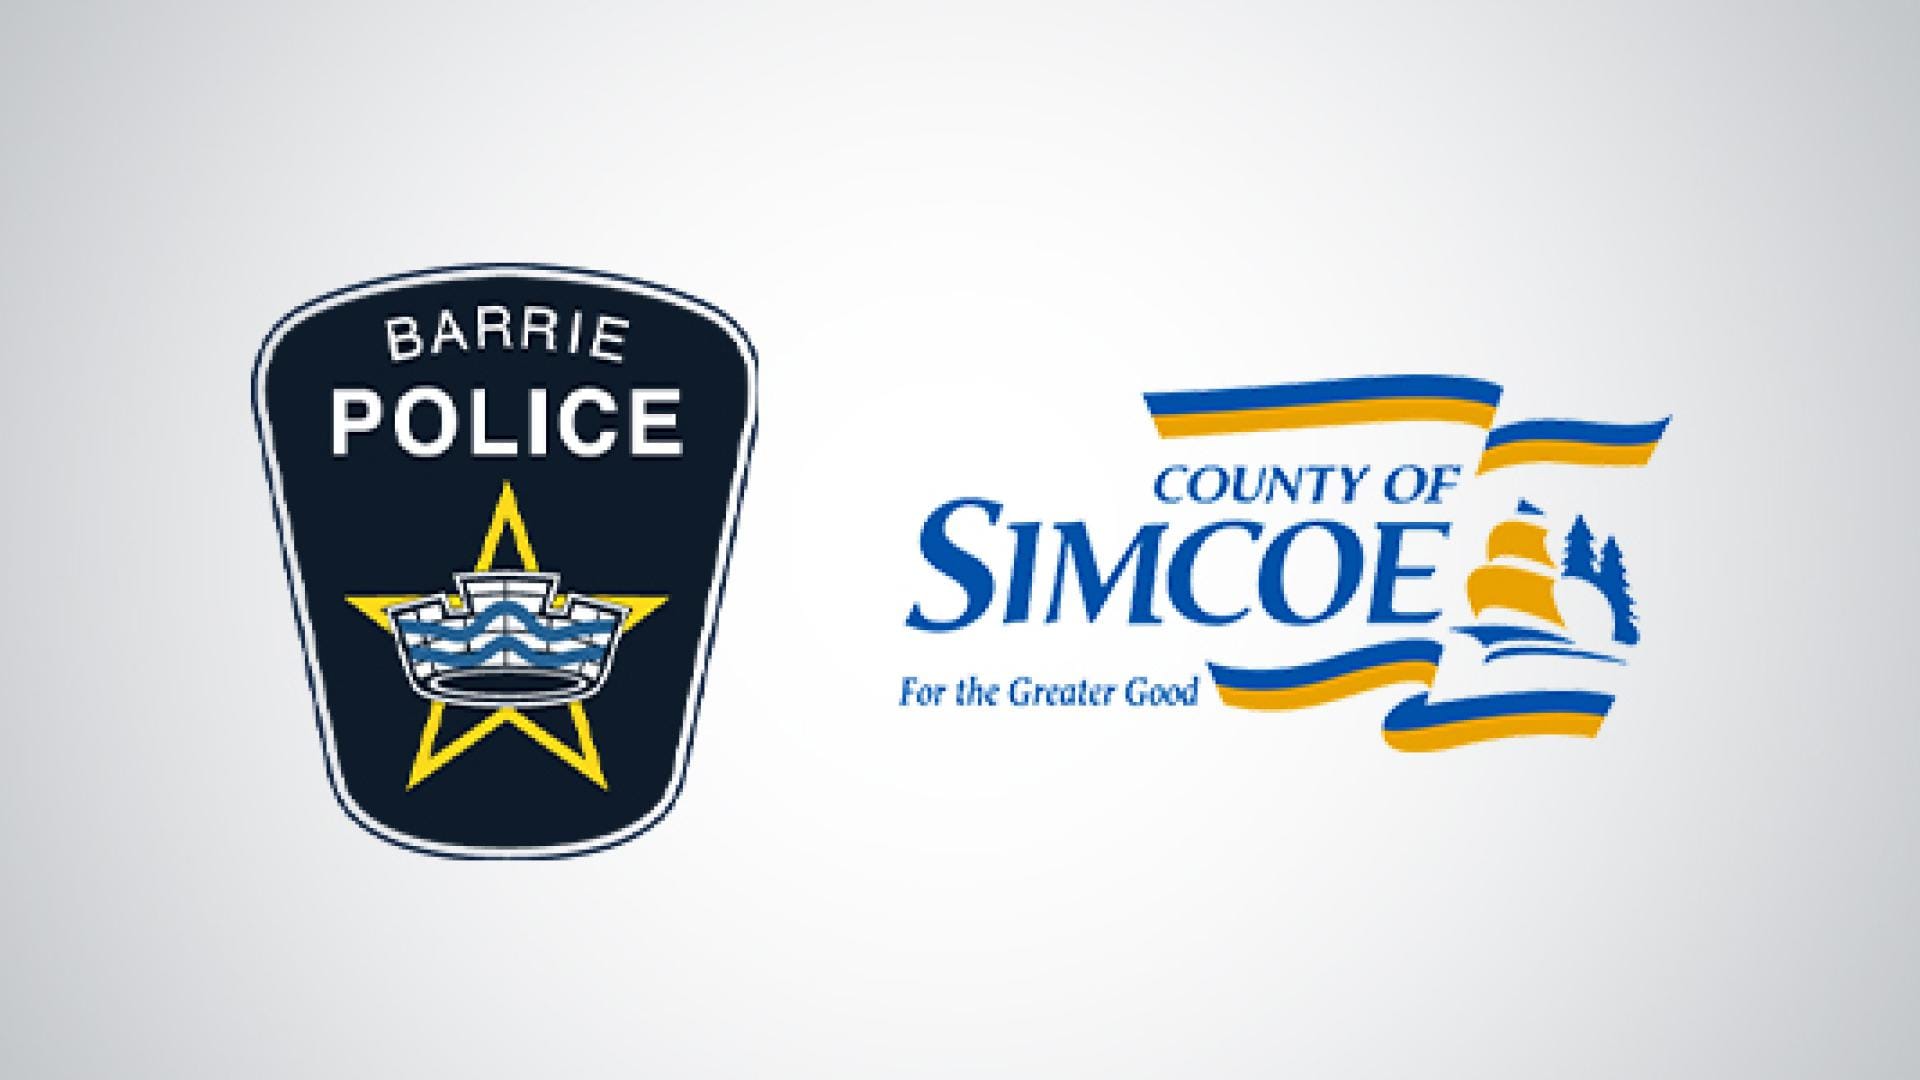 Barrie Police Service logo and County of Simcoe logo